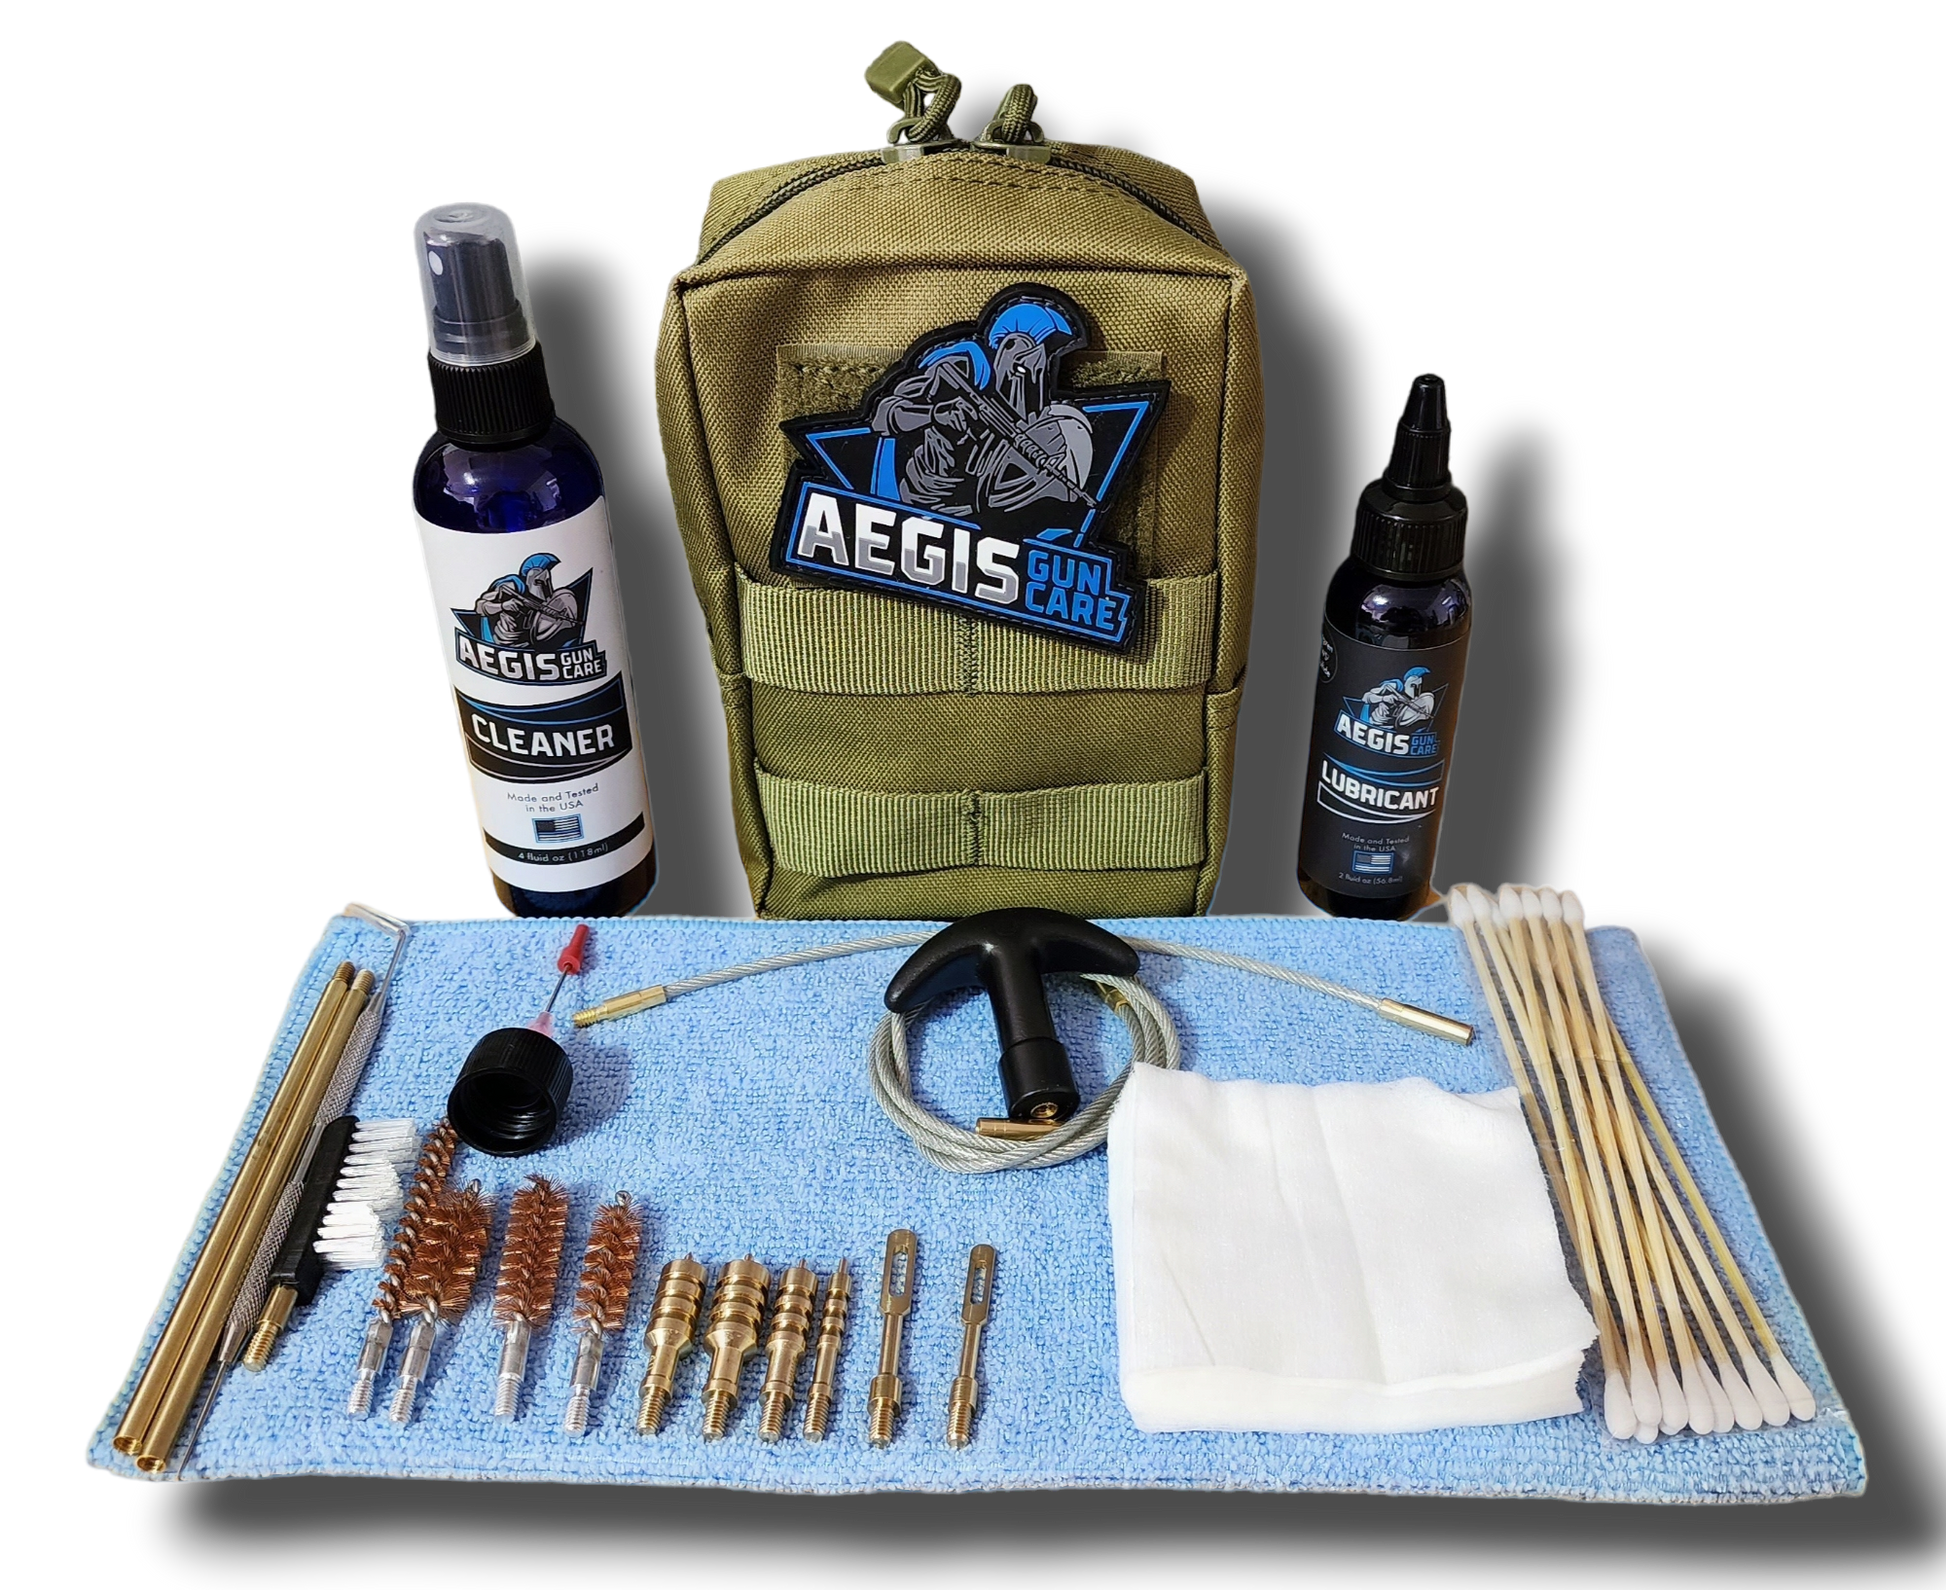 Aegis deluxe field cleaning kit (od greeen)